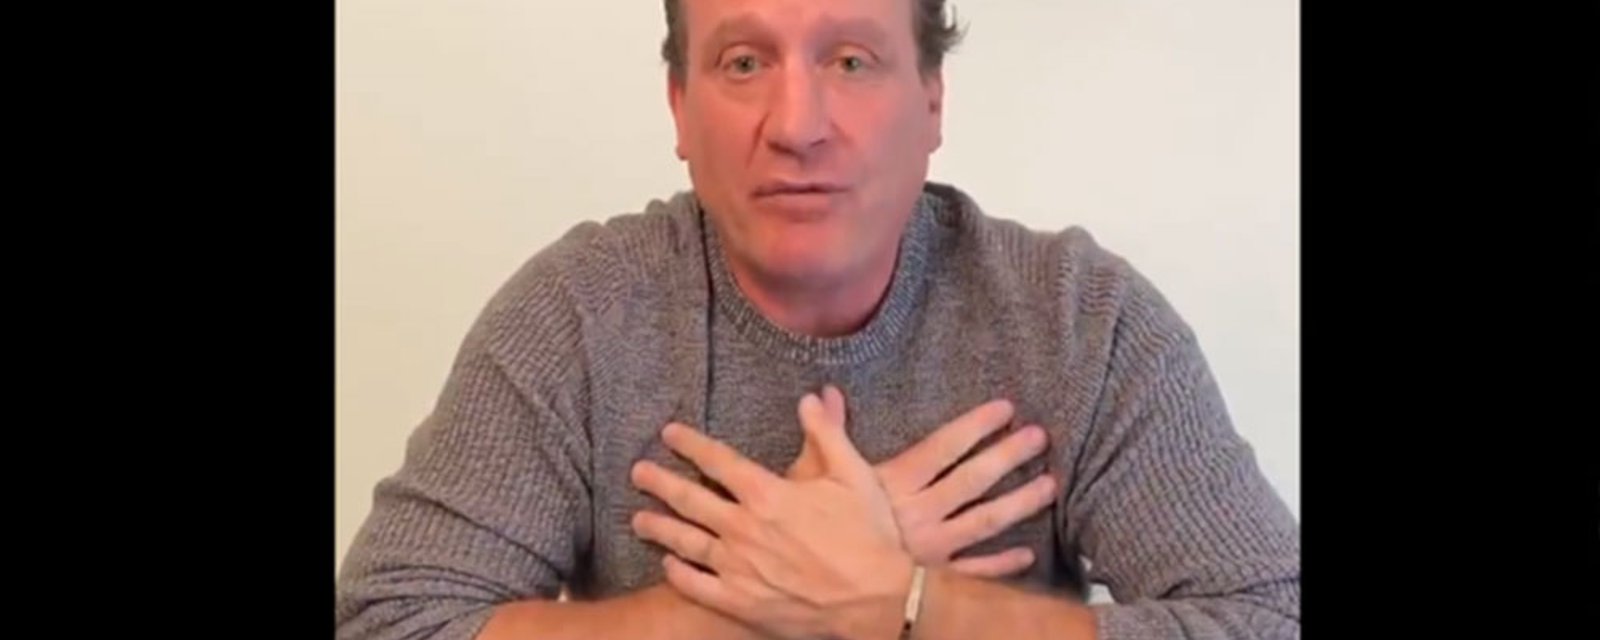 Roenick officially responds to firing from NBC, calls it “a joke”